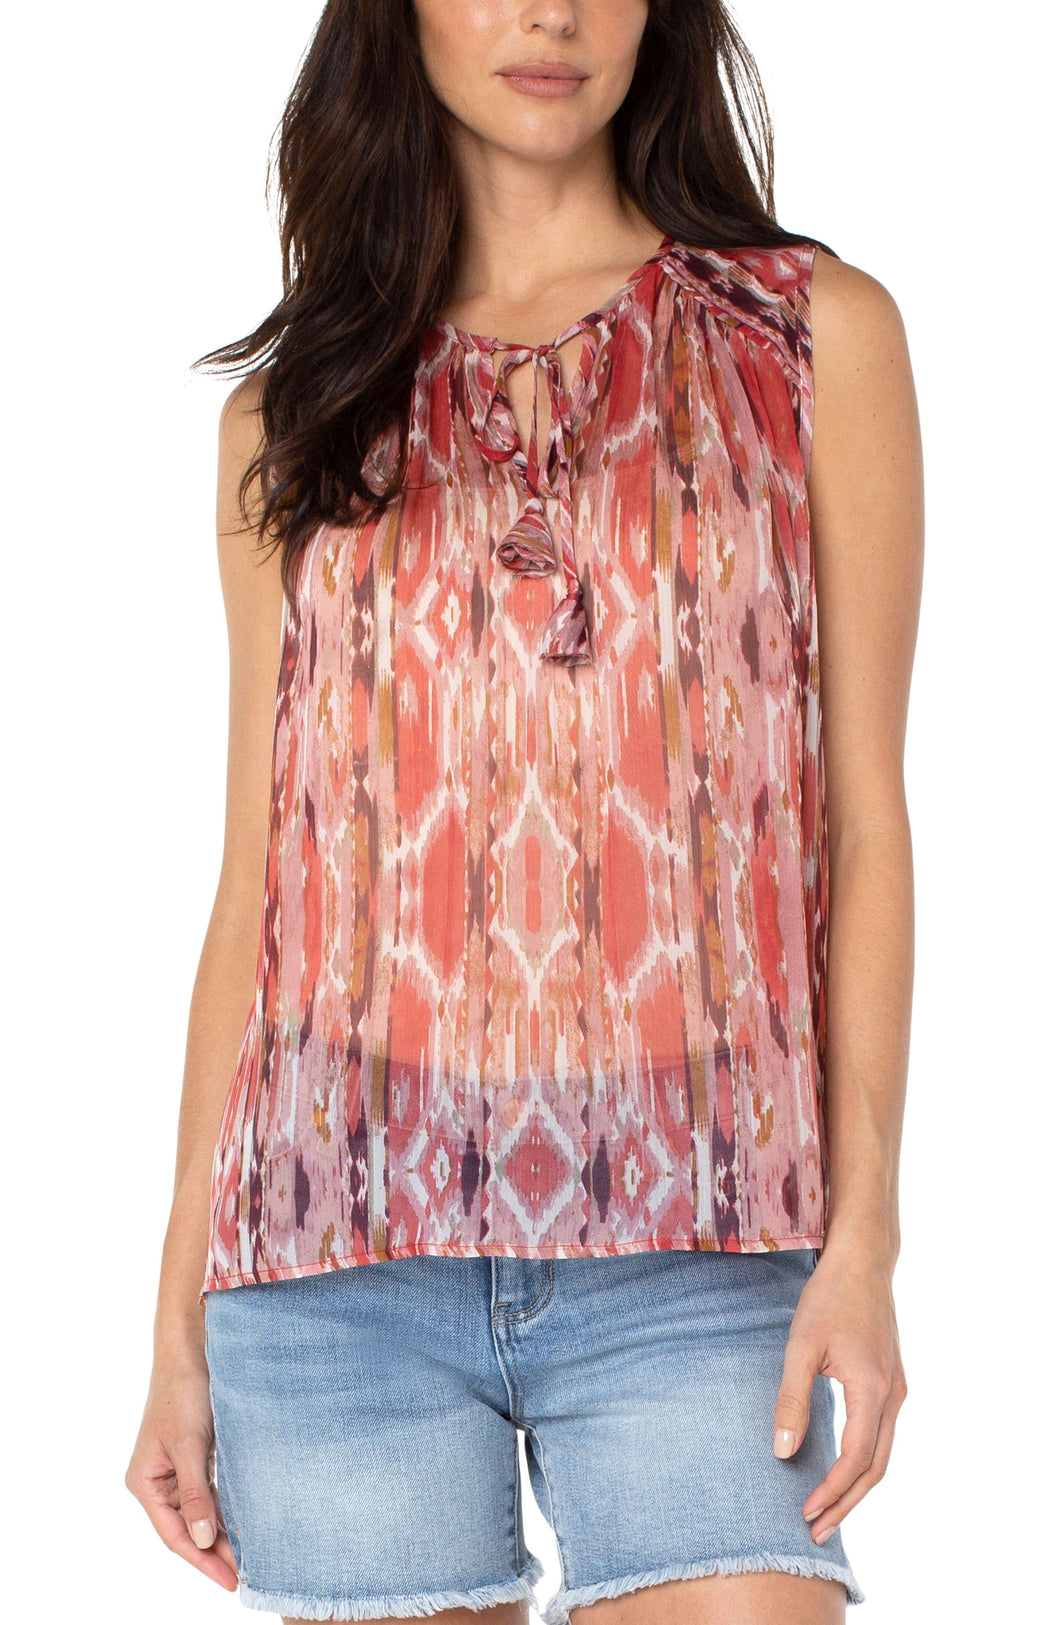 Our beautiful Willow top is a top for all seasons.  A top with an edge, this style is perfect worn alone or under a jean jacket or blazer.  Perfect for those really hot days when you need a stylish top that will keep you cool and comfortable.